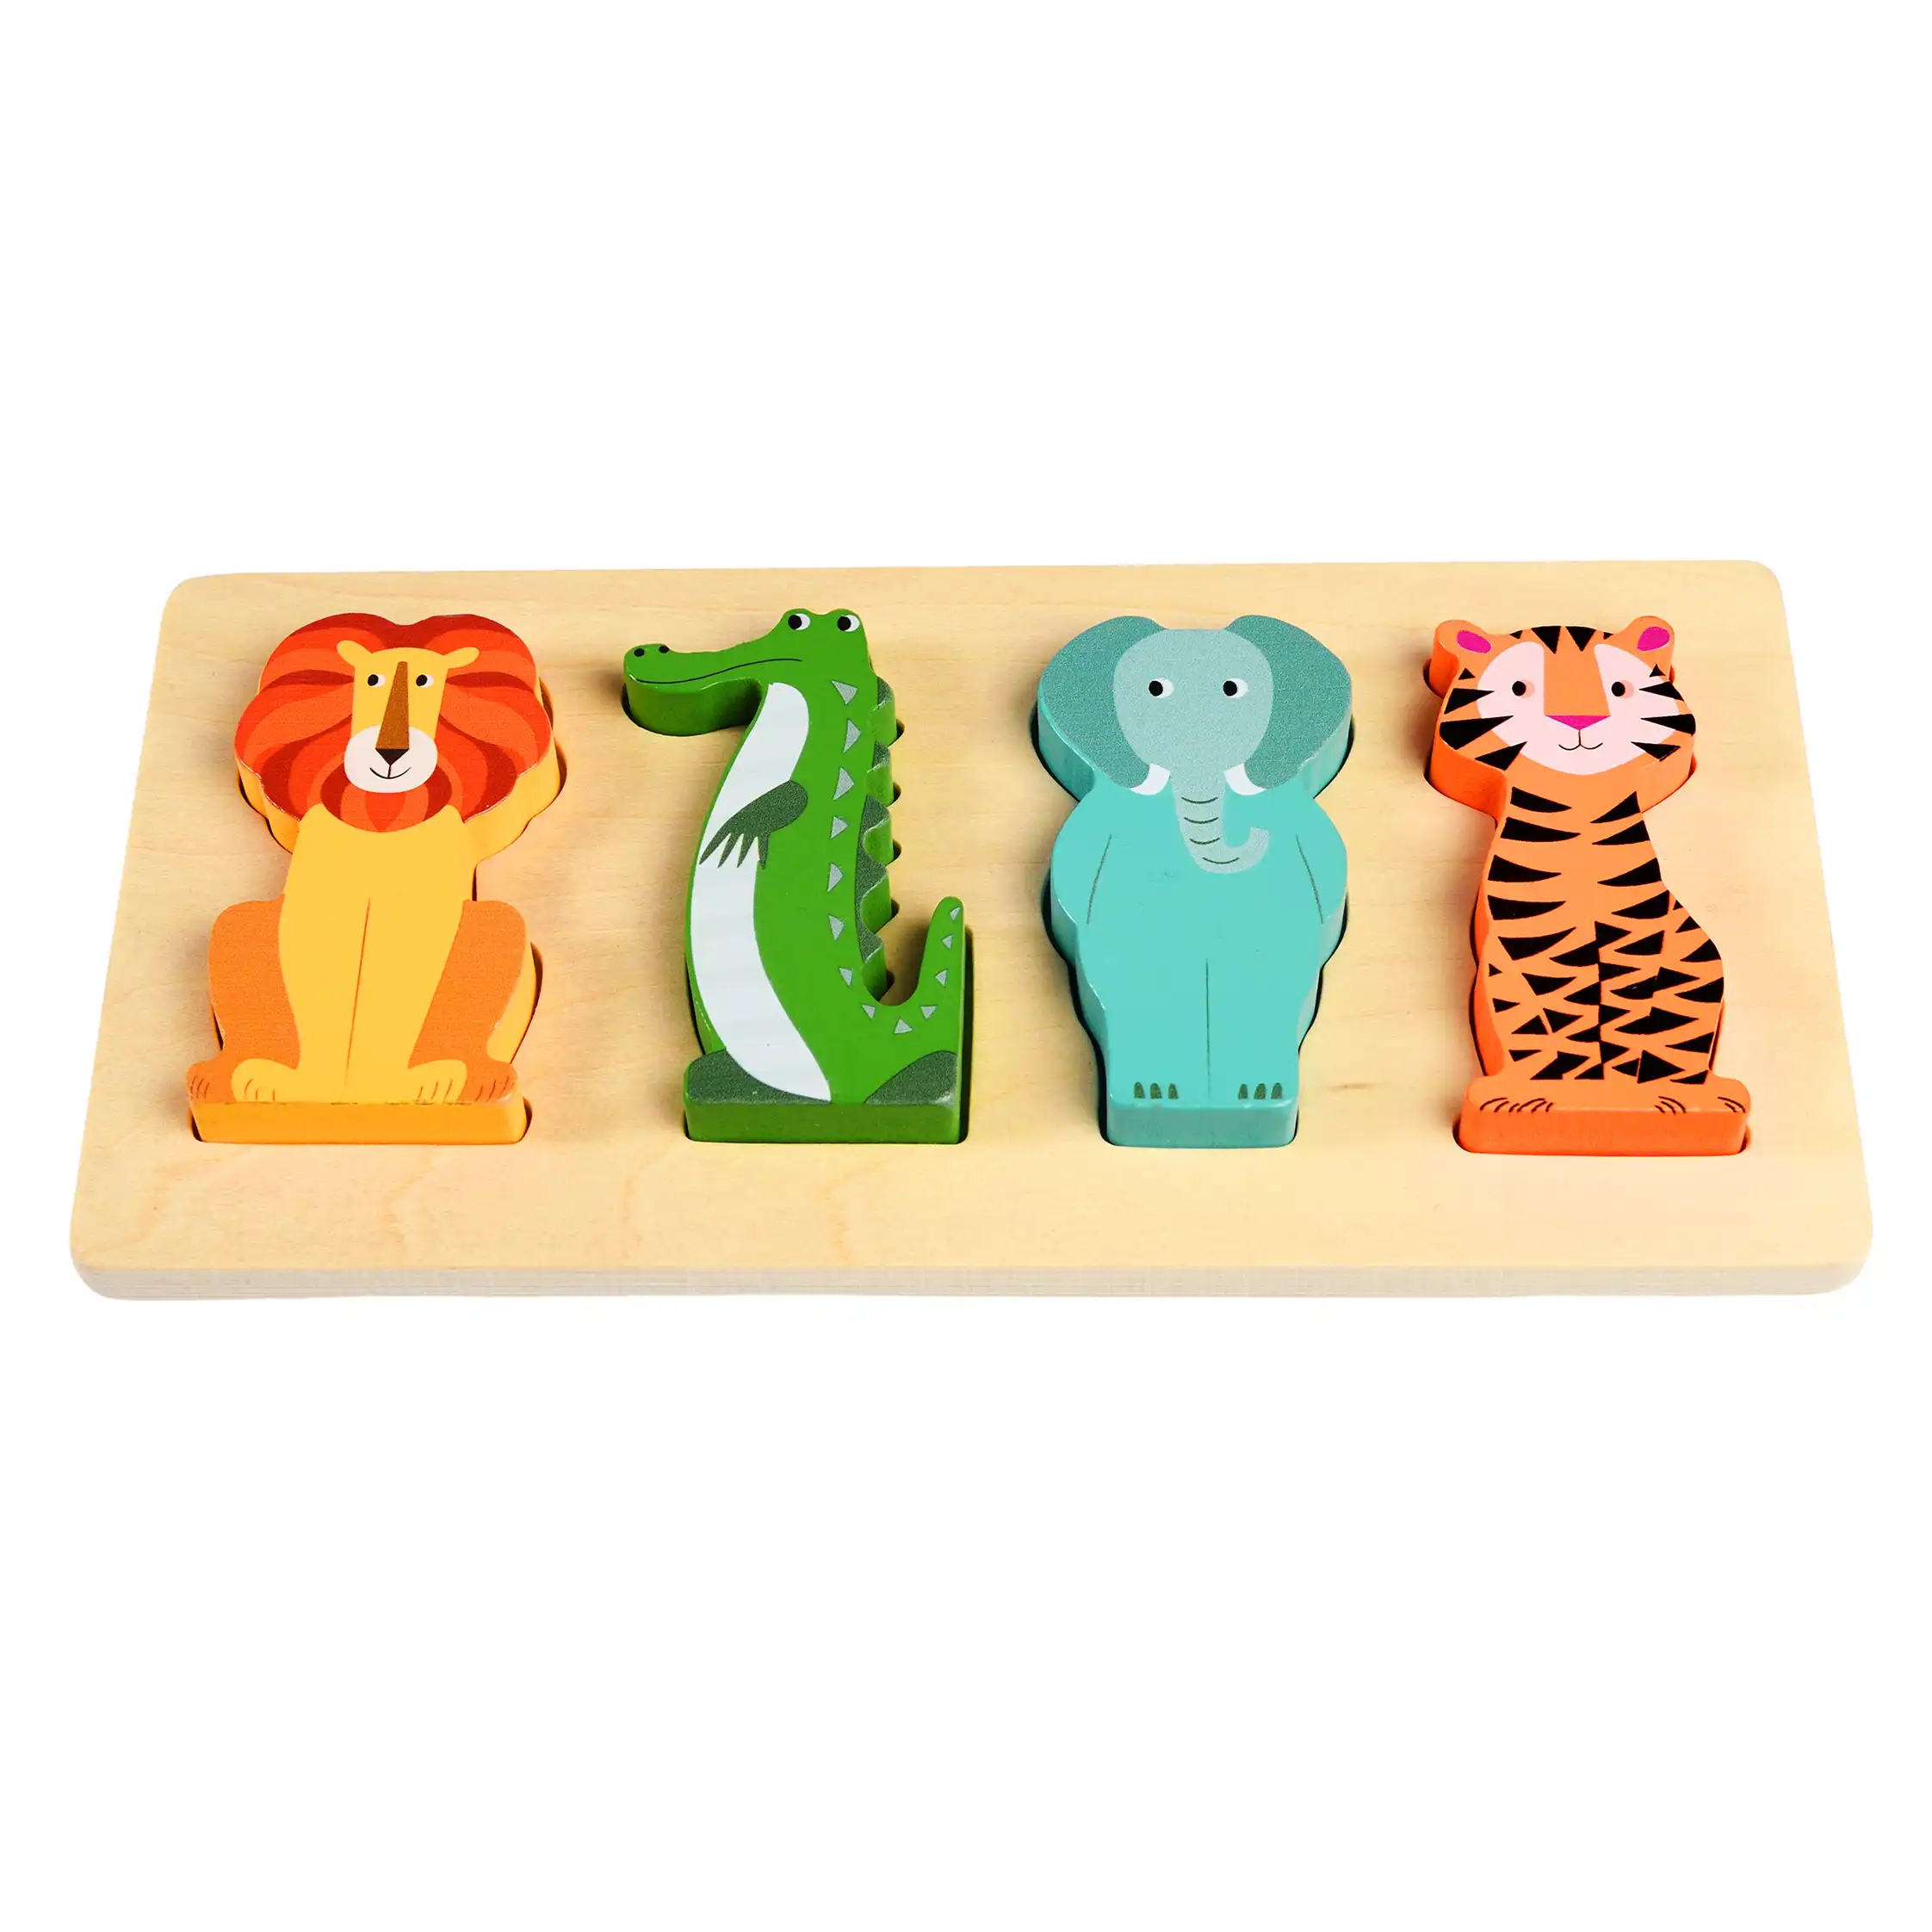 holzpuzzle colourful creatures